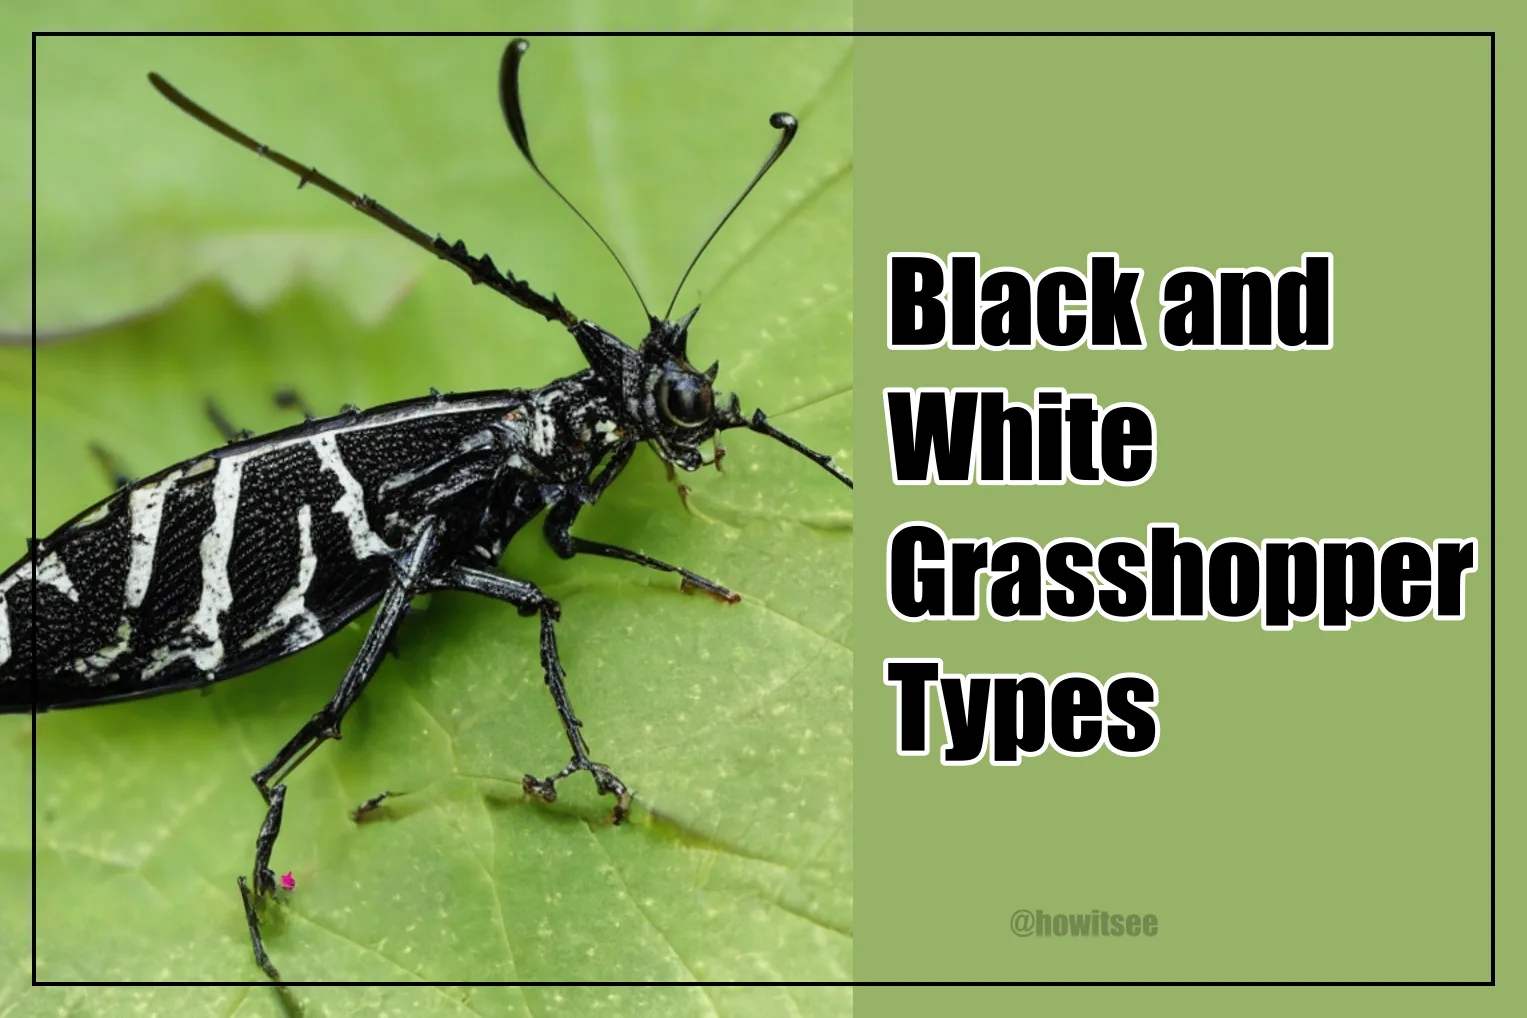 Black and White Grasshoppers